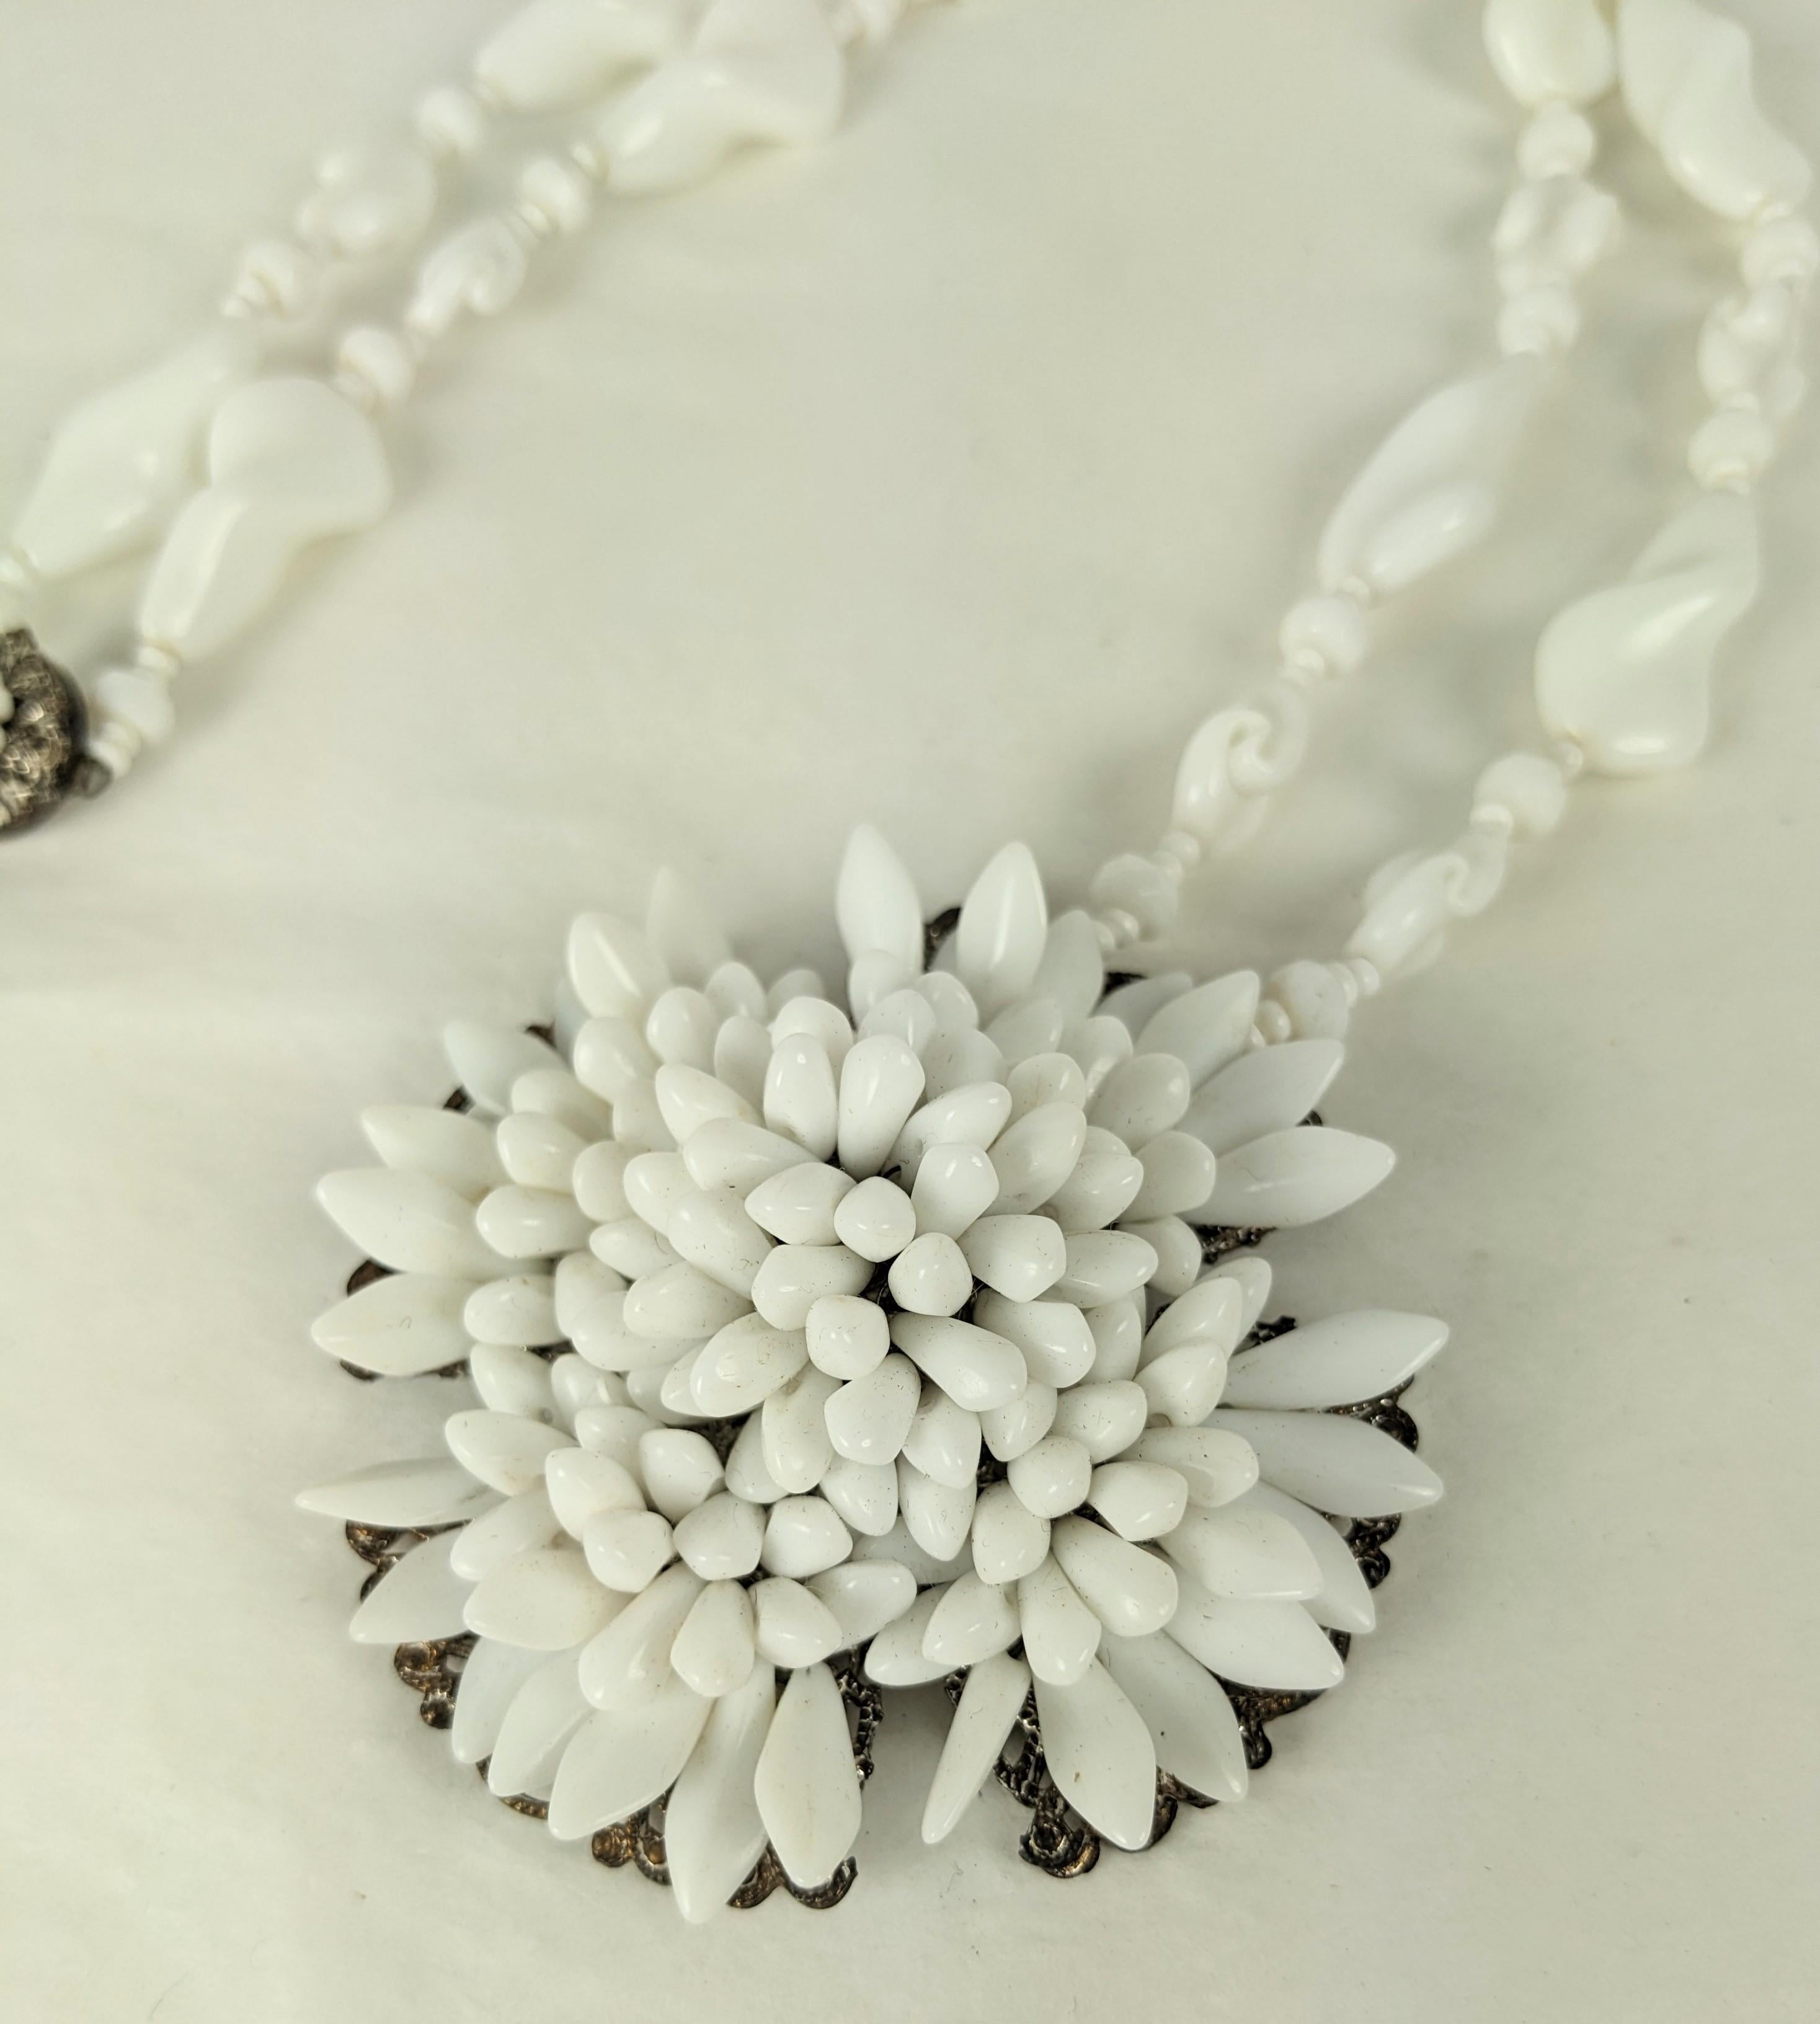 Women's Miriam Haskell Milk Glass Spike Pendant For Sale